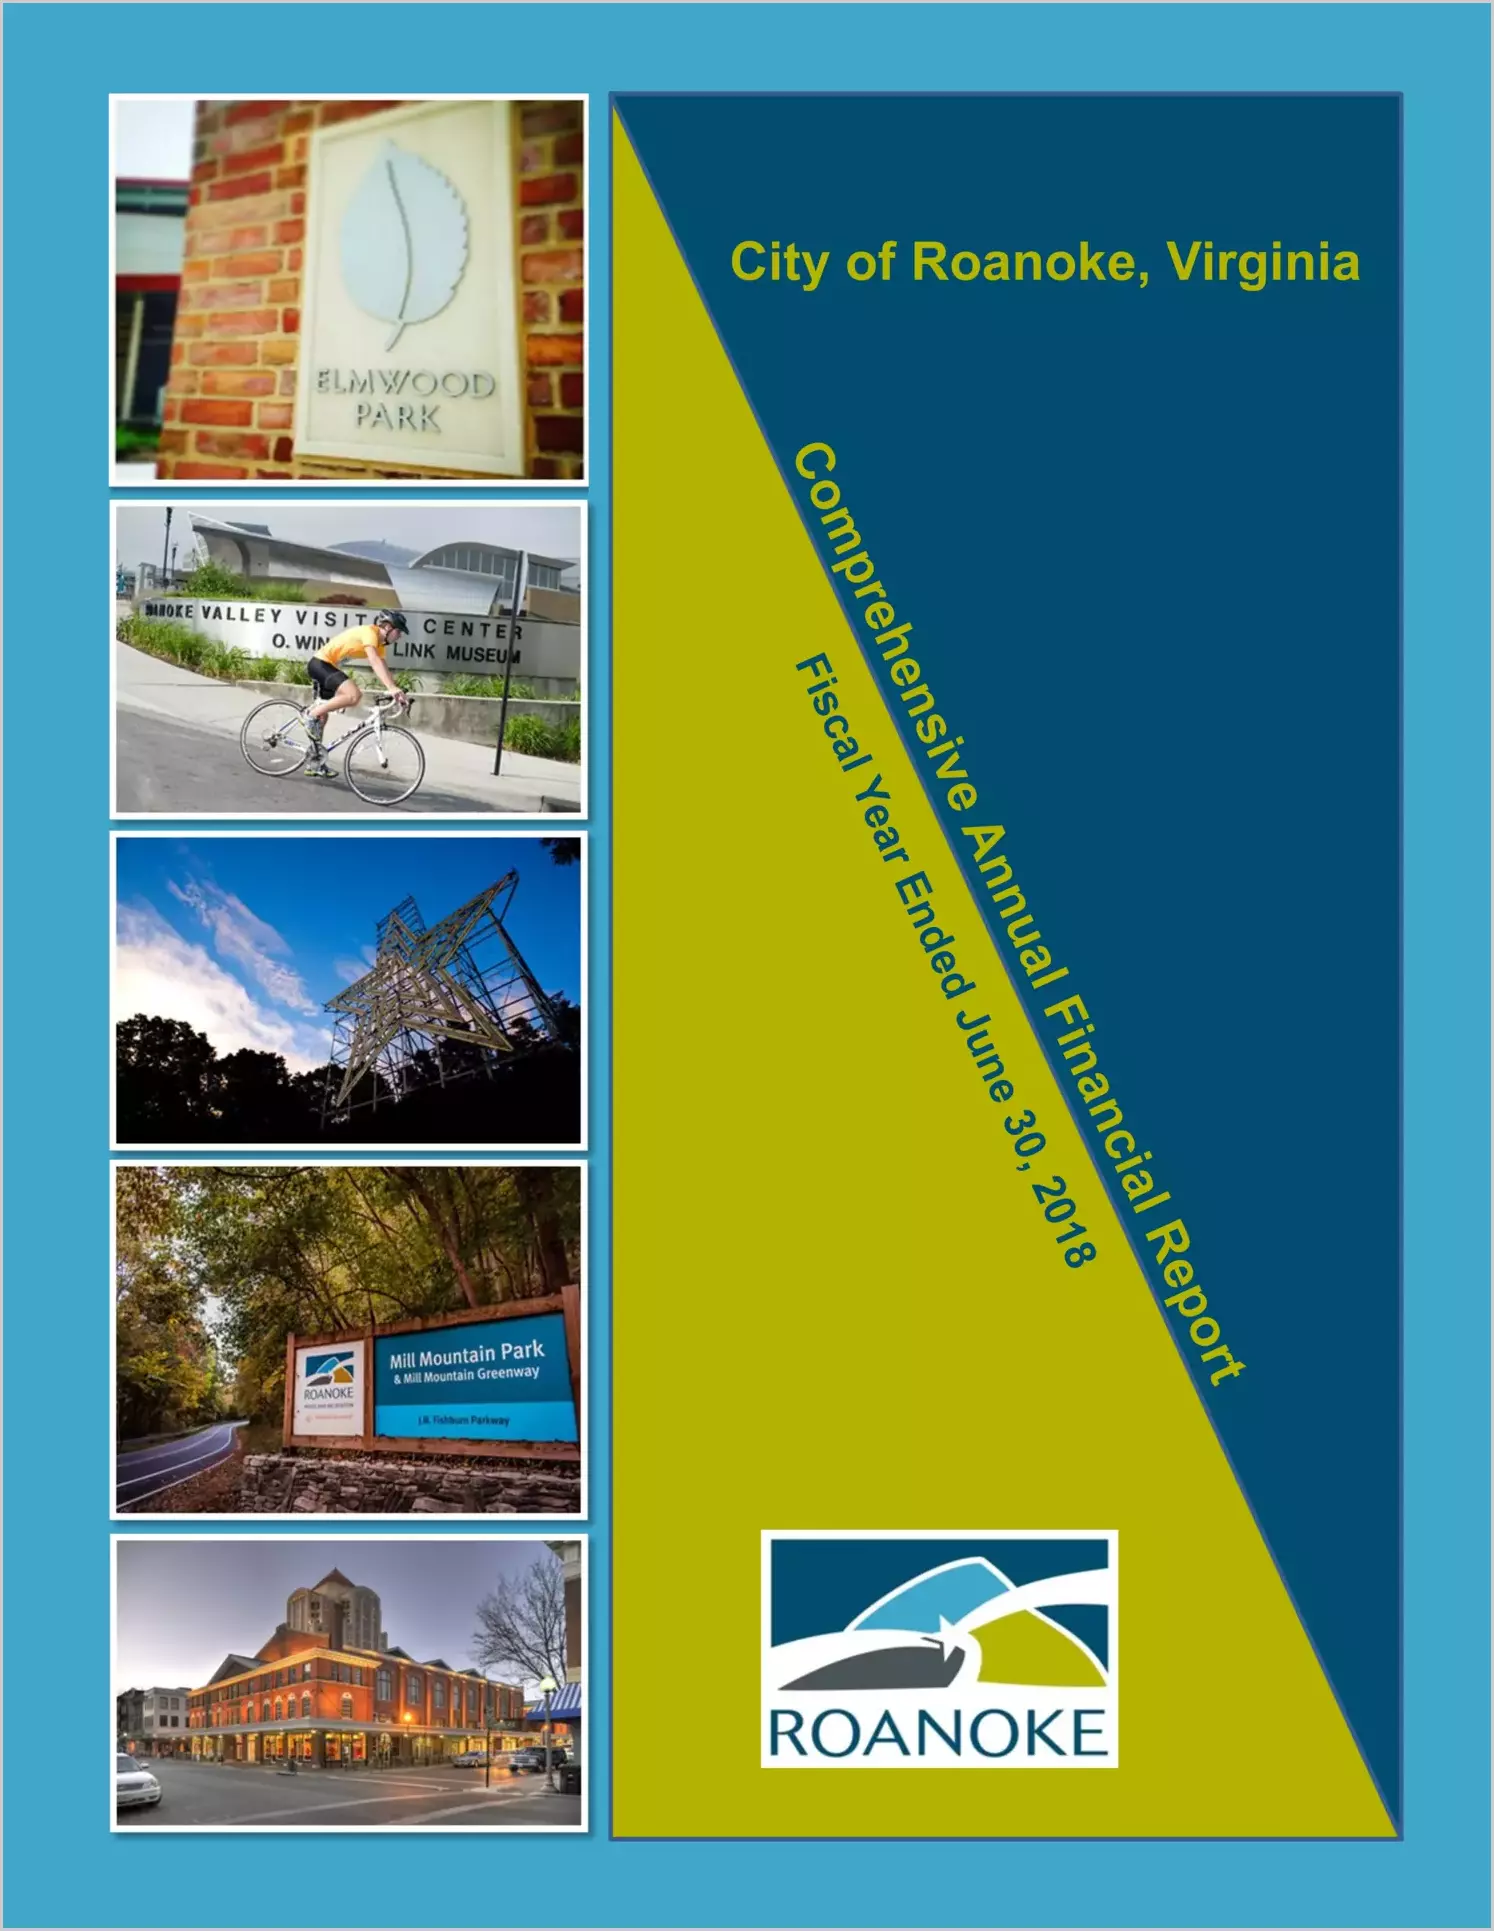 2018 Annual Financial Report for City of Roanoke